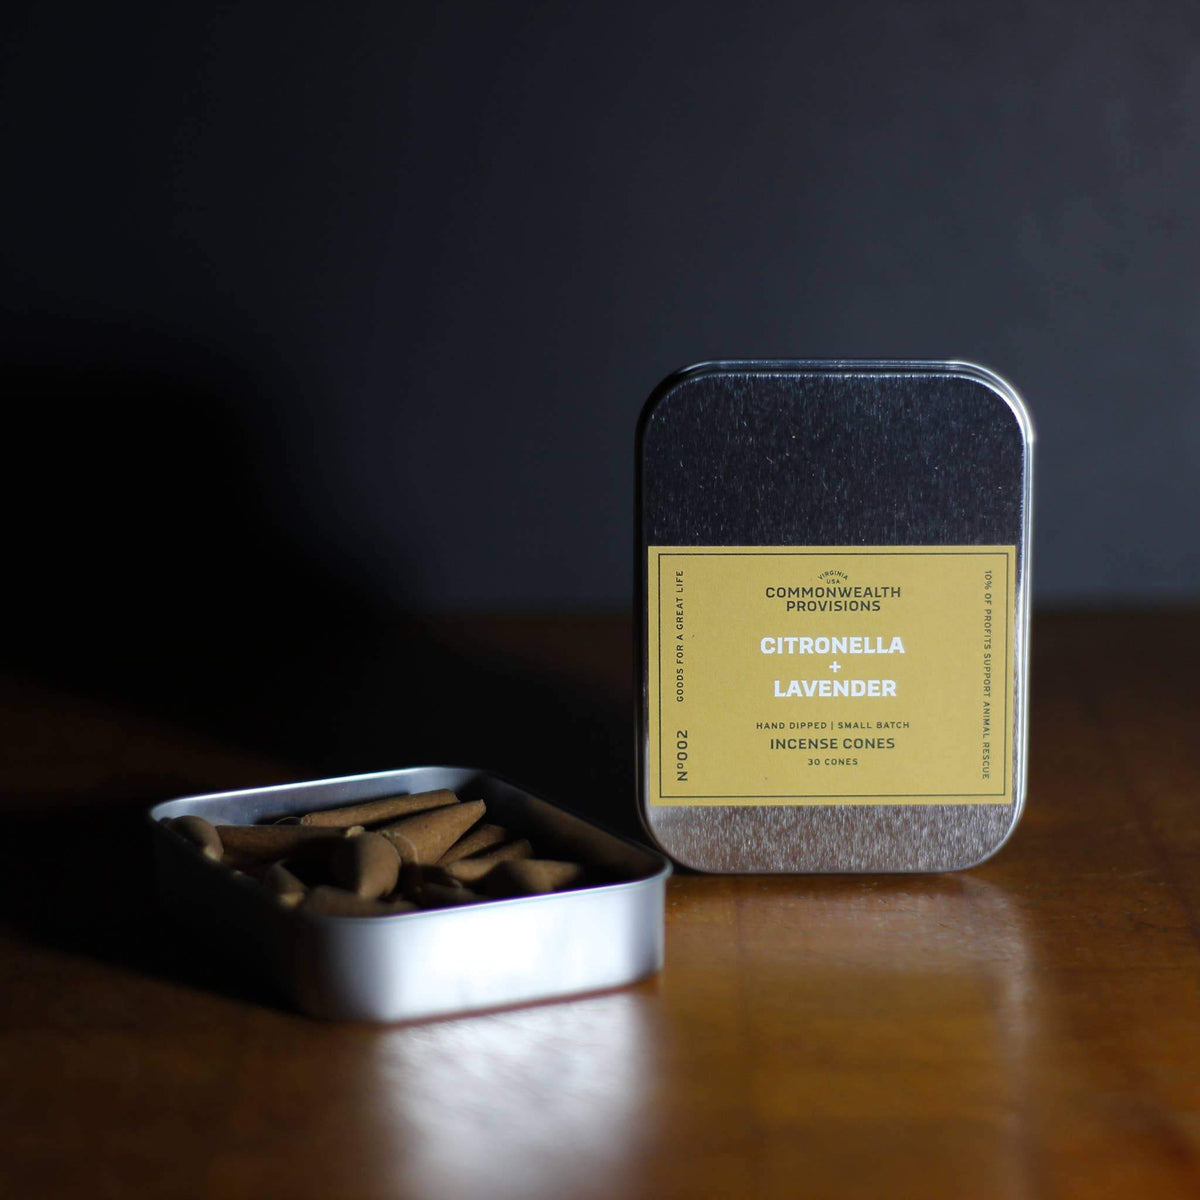 A small, square tin labeled "Commonwealth Provisions Citronella + Lavender Incense Cones" containing Commonwealth Provisions outdoor incense cones on a wooden table, highlighting the product's unique packaging and use.